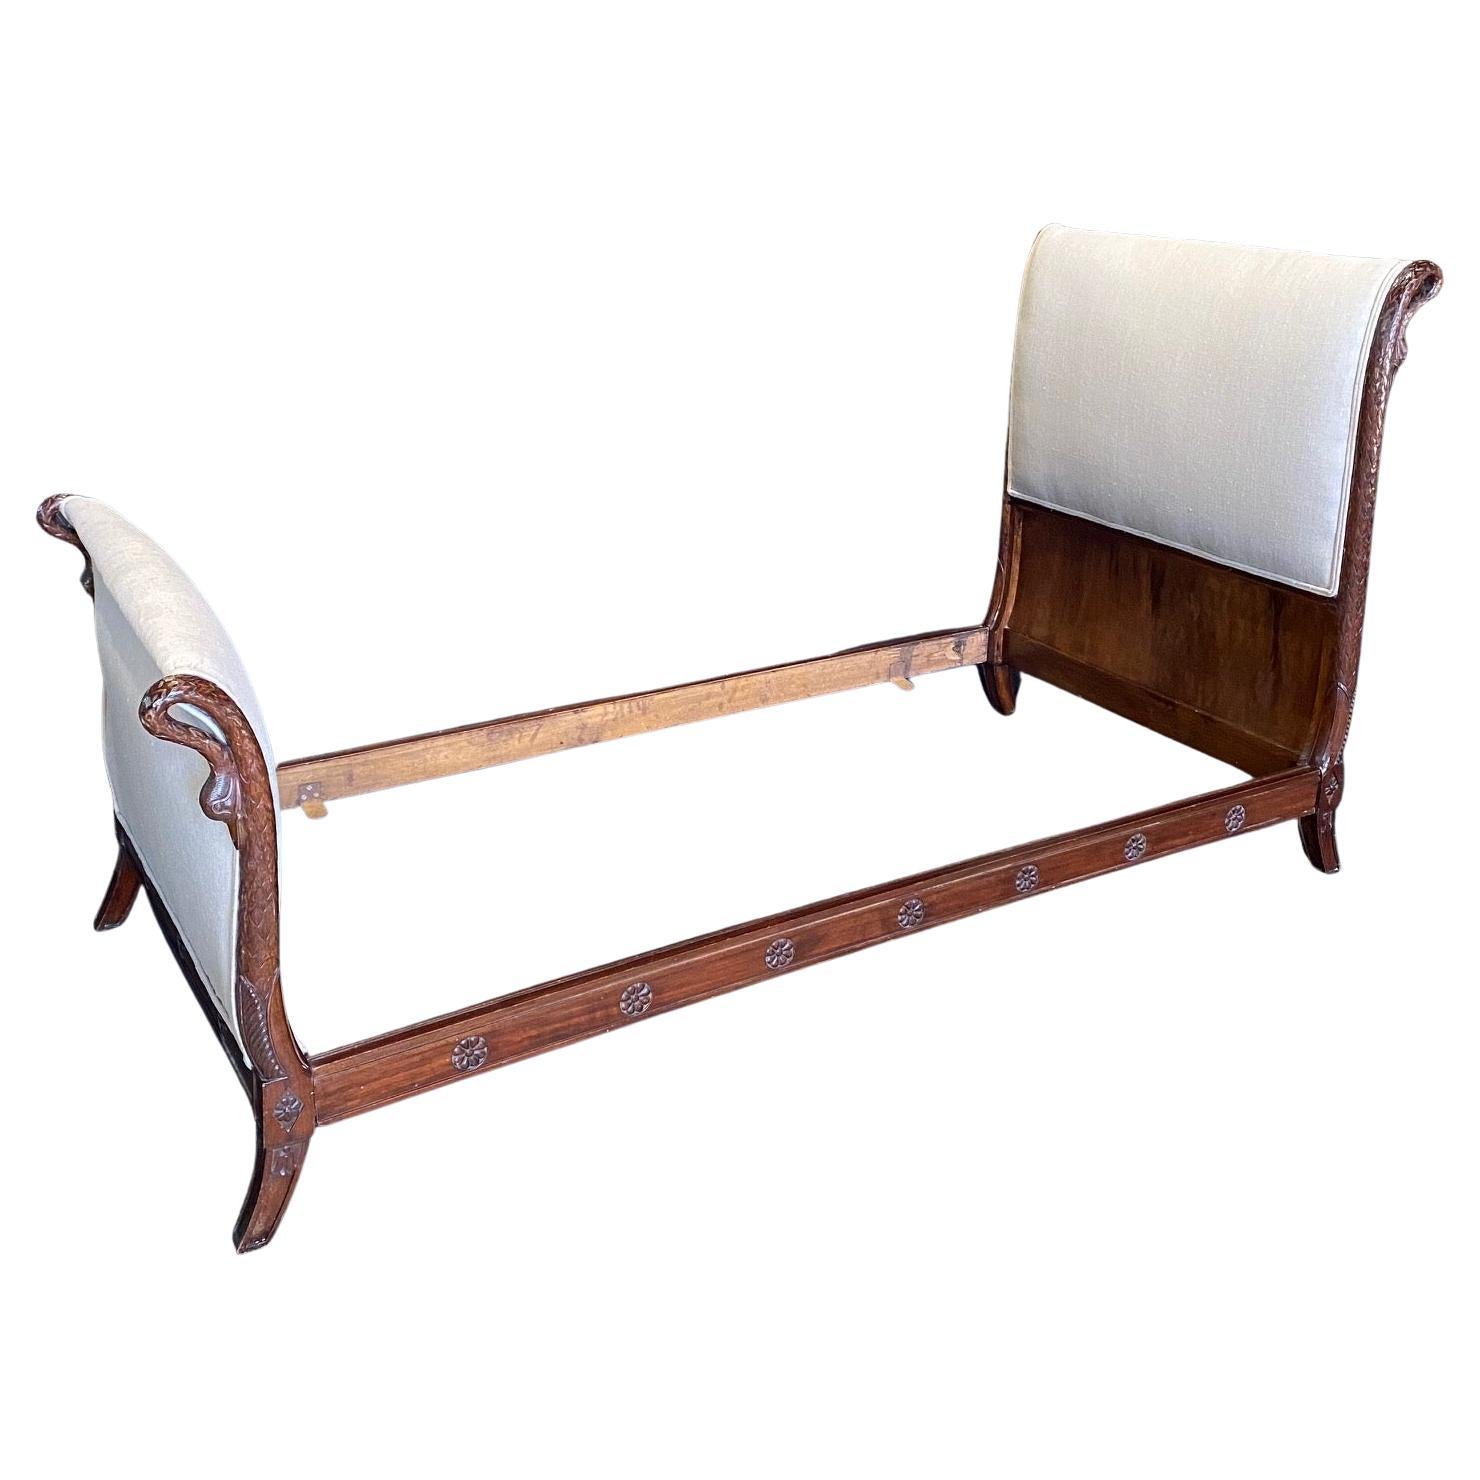 Incredible Neoclassical French Empire Swan Neck Daybed or Single Bed For Sale